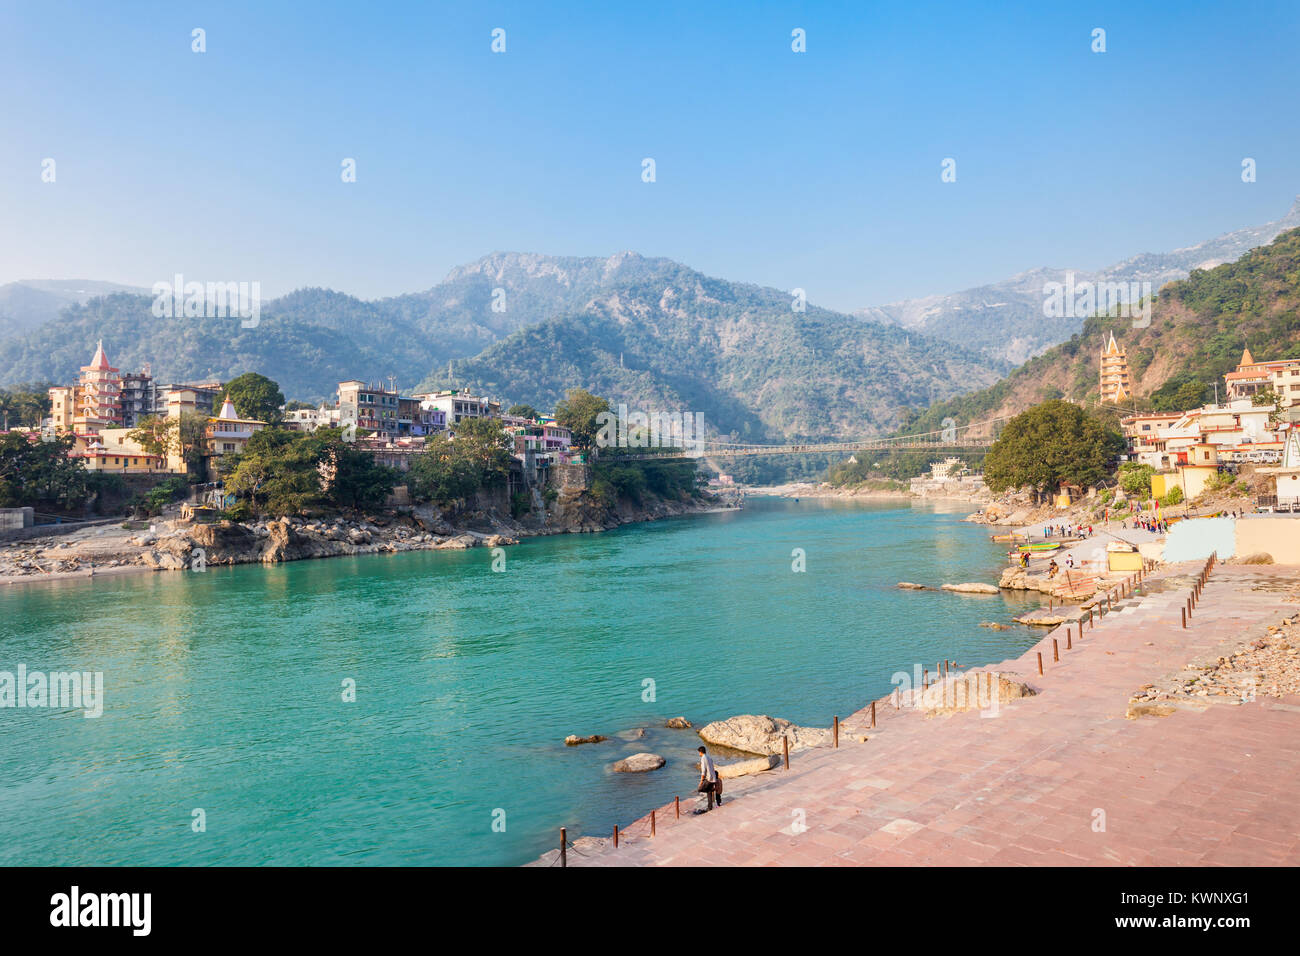 Rishikesh is a city in Dehradun district of Uttarakhand state in nothern India. It is known as the Yoga Capital of the World. Stock Photo